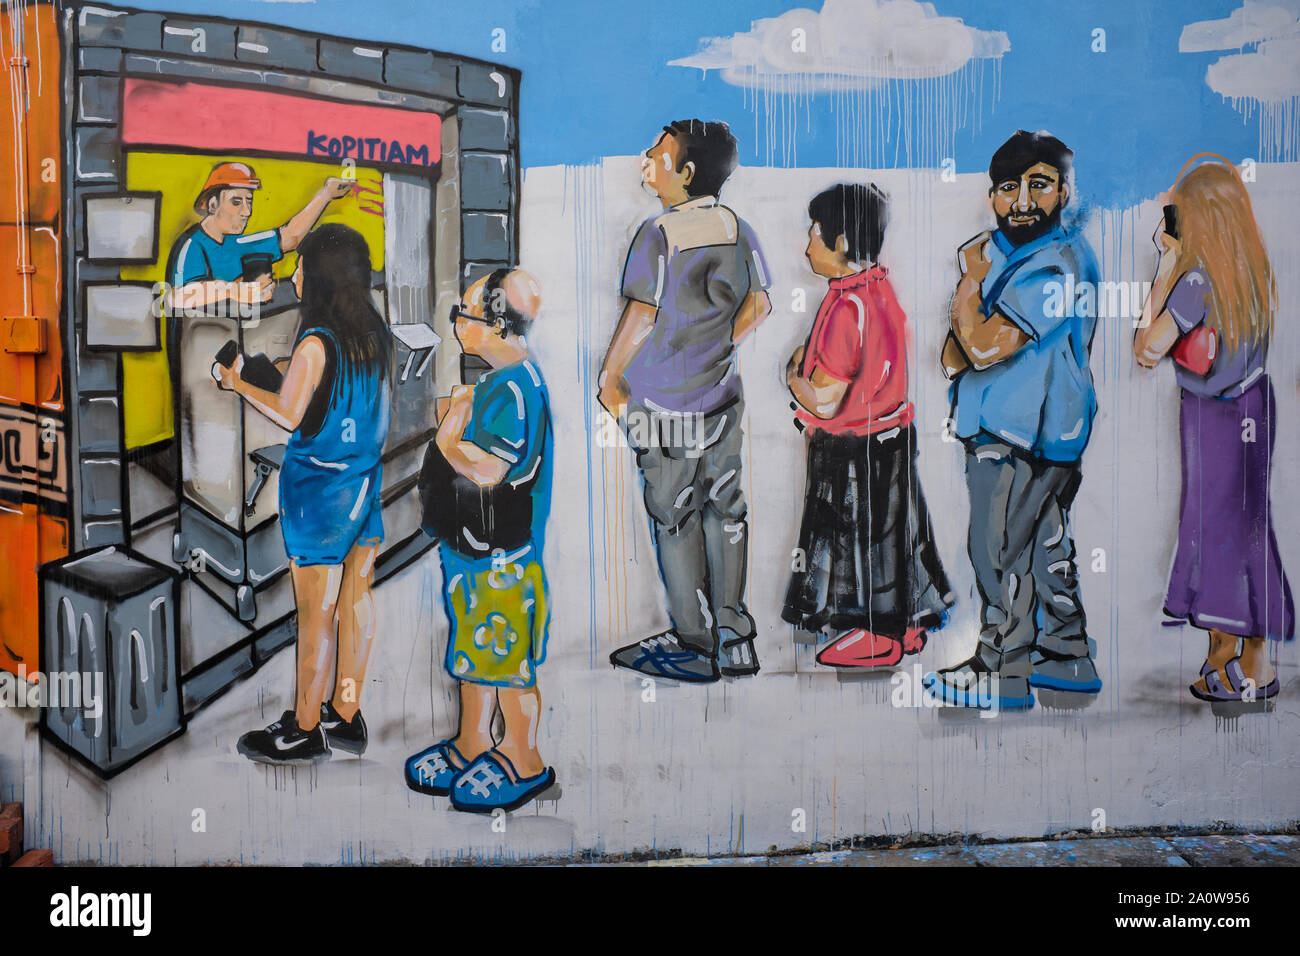 A wall painting in Keong Saik Road., Chinatown, Singapore, depicting a queue in front of a typical local coffee stall or Kopitiam Stock Photo